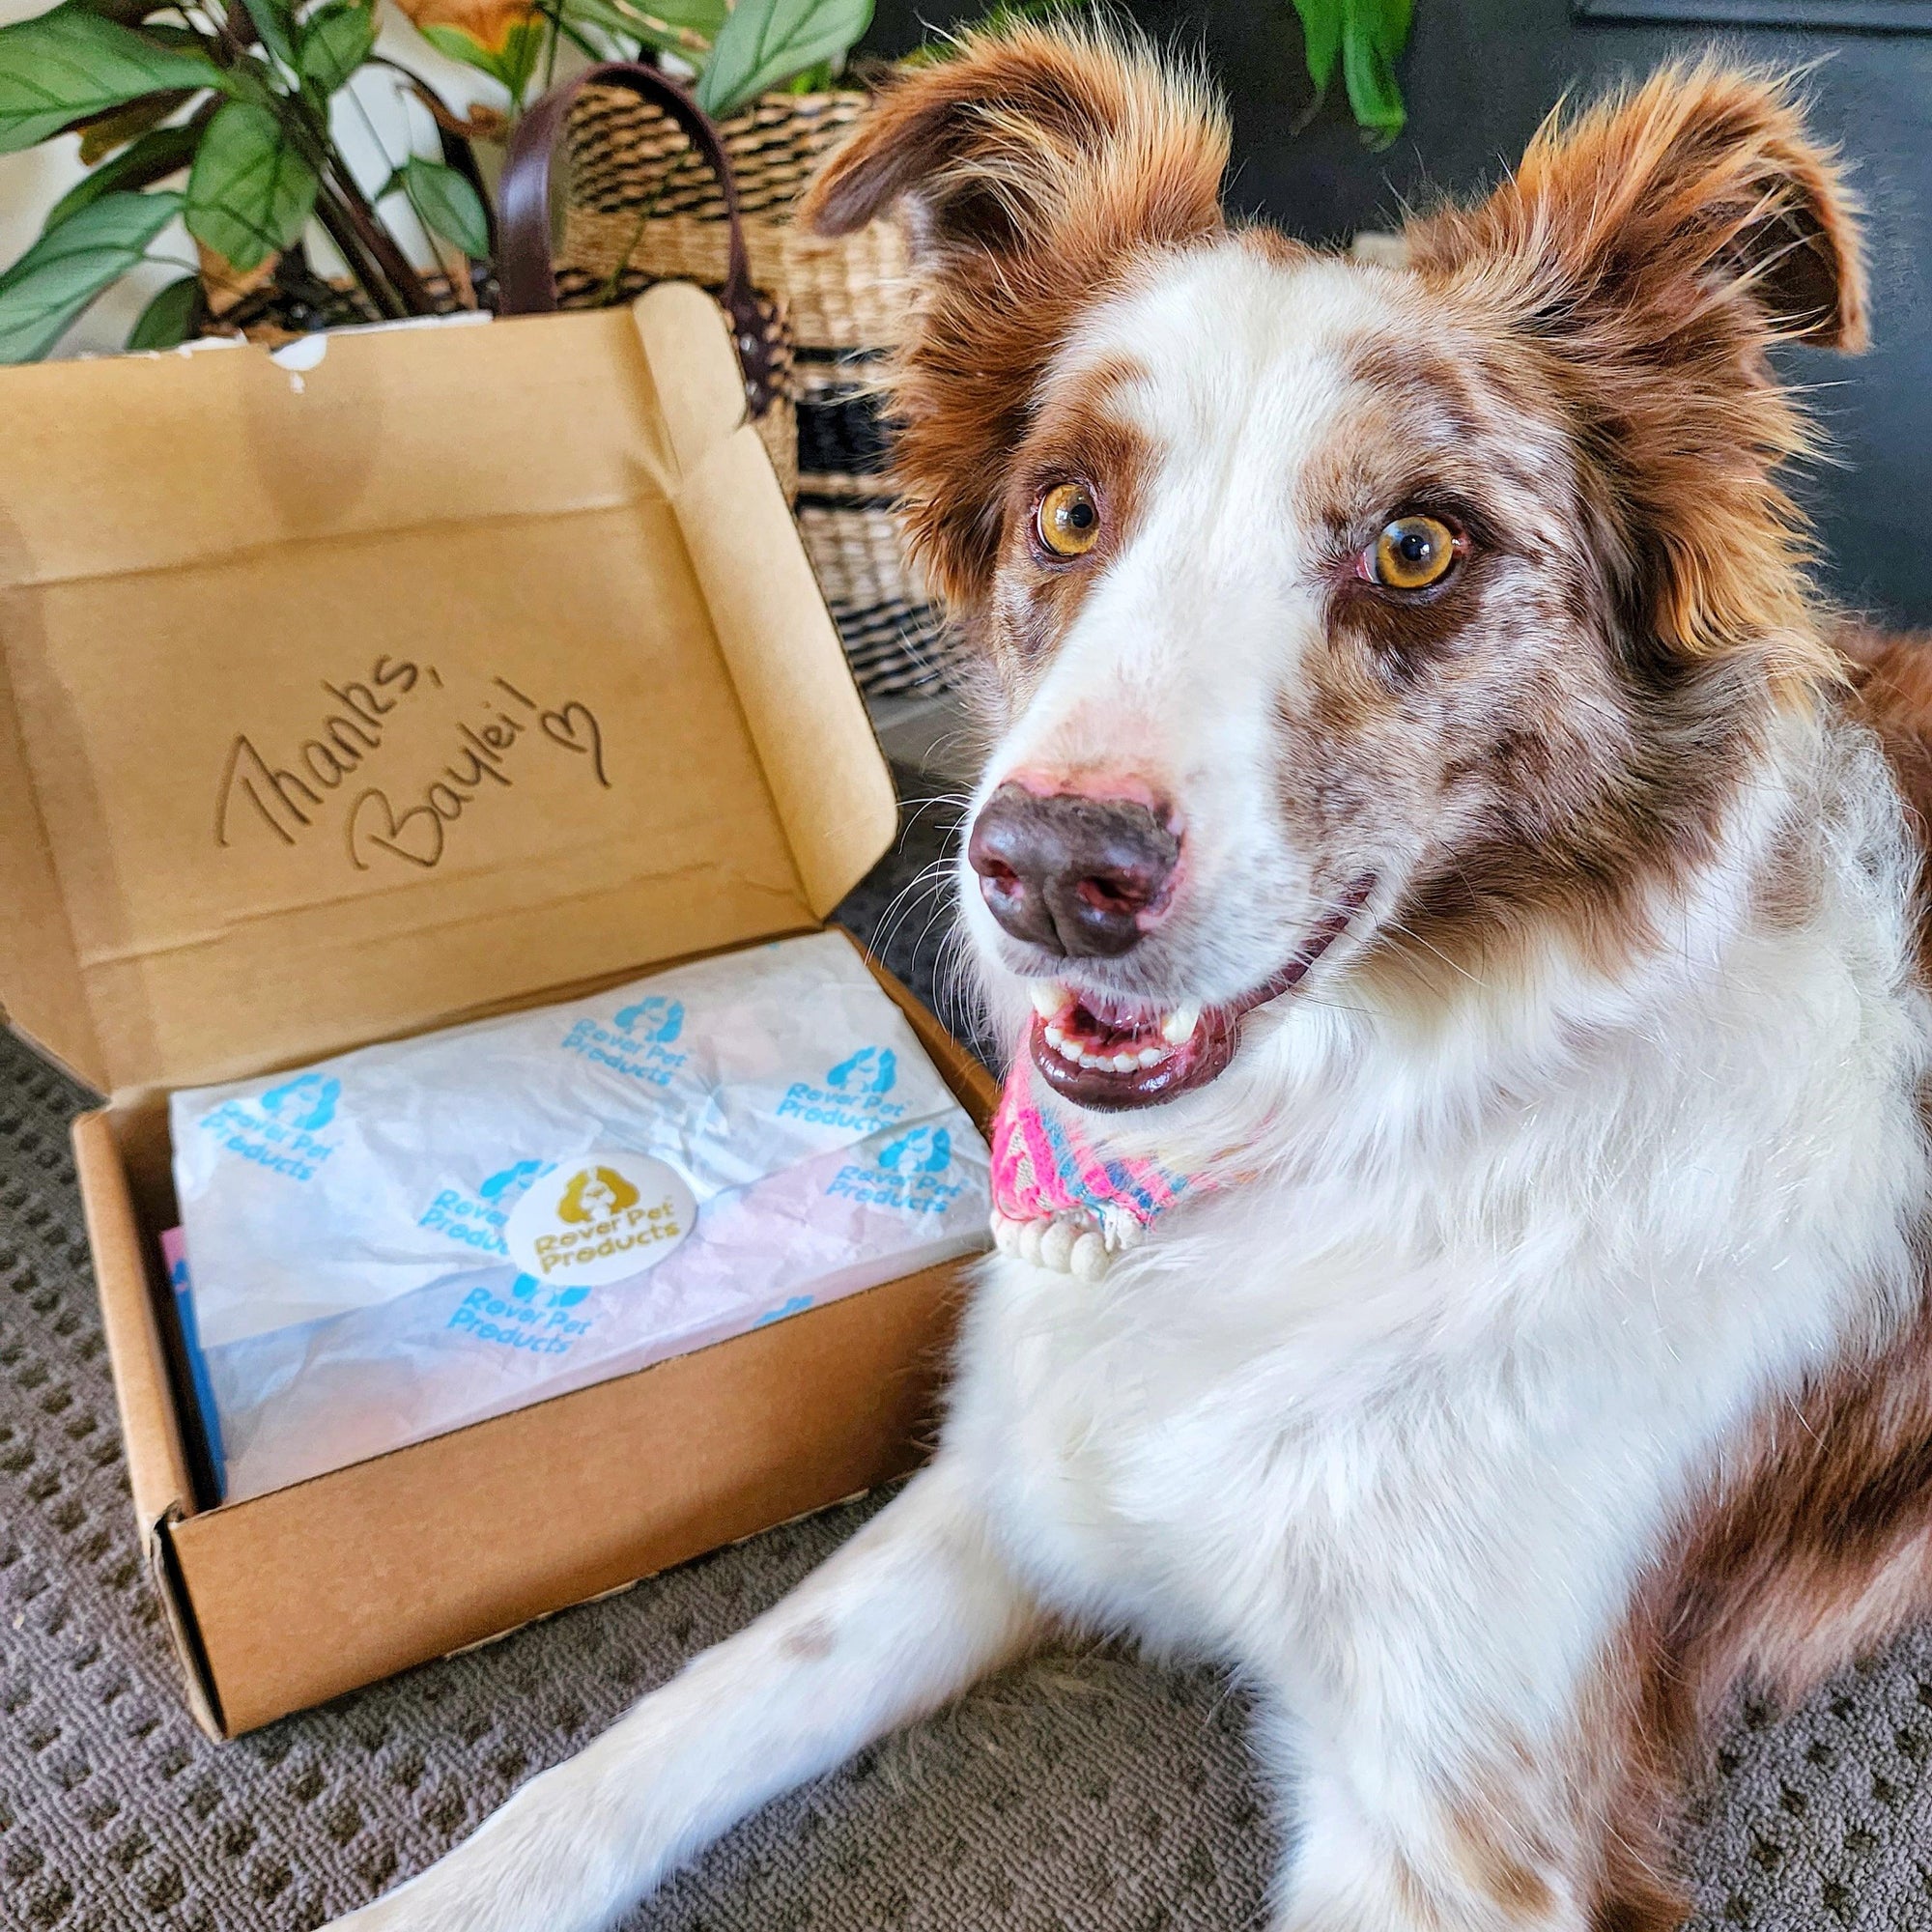 New Packaging Makes Us Woof!